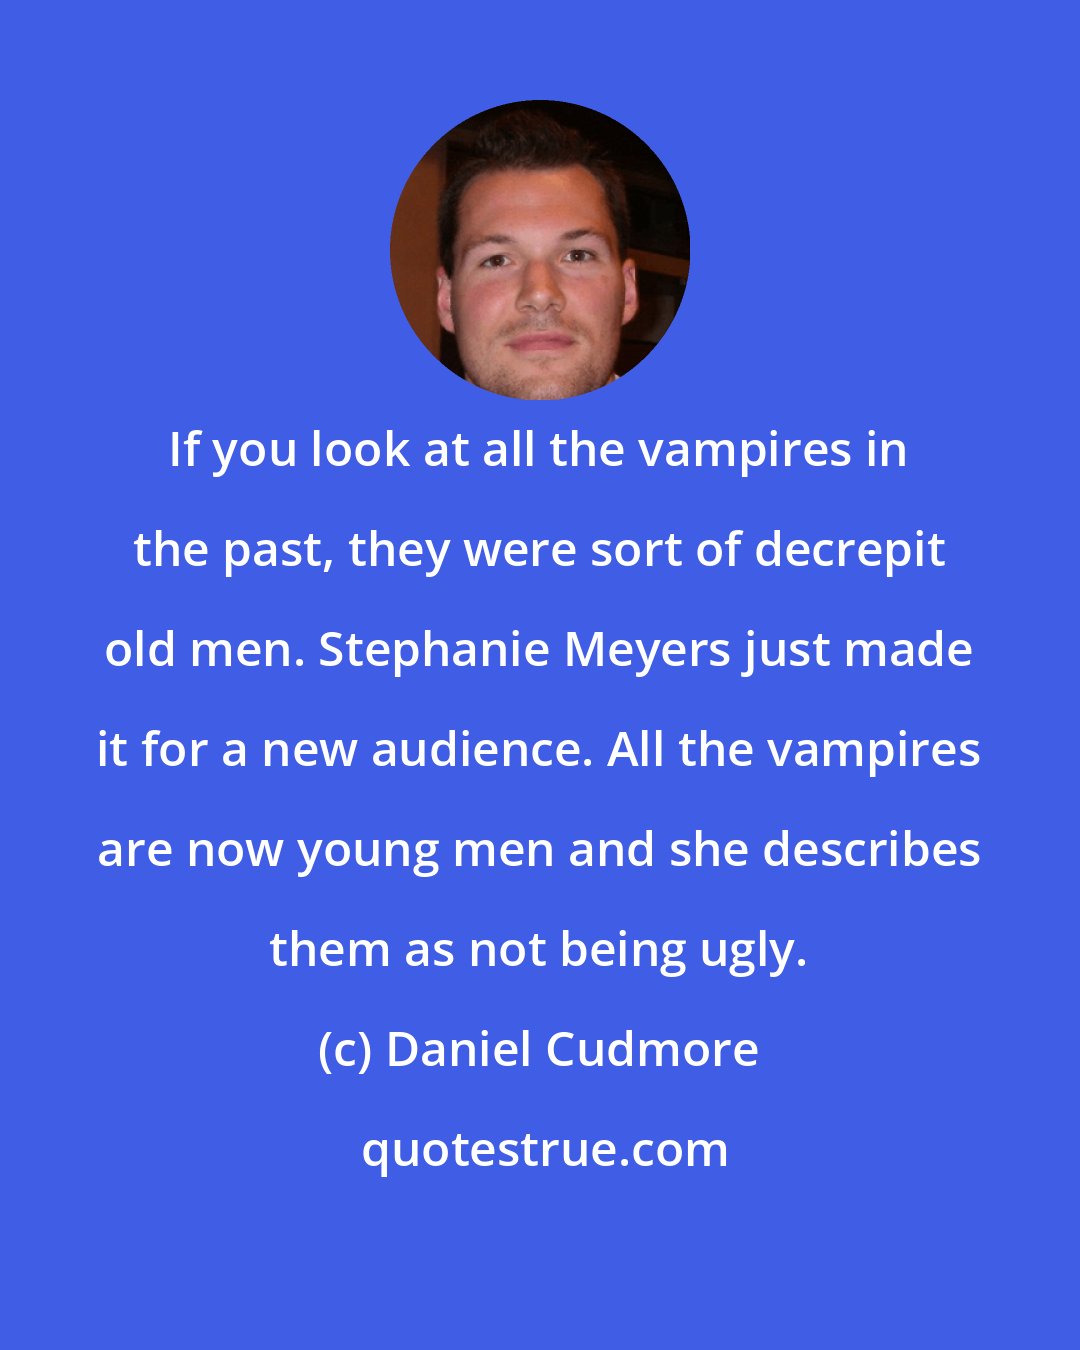 Daniel Cudmore: If you look at all the vampires in the past, they were sort of decrepit old men. Stephanie Meyers just made it for a new audience. All the vampires are now young men and she describes them as not being ugly.